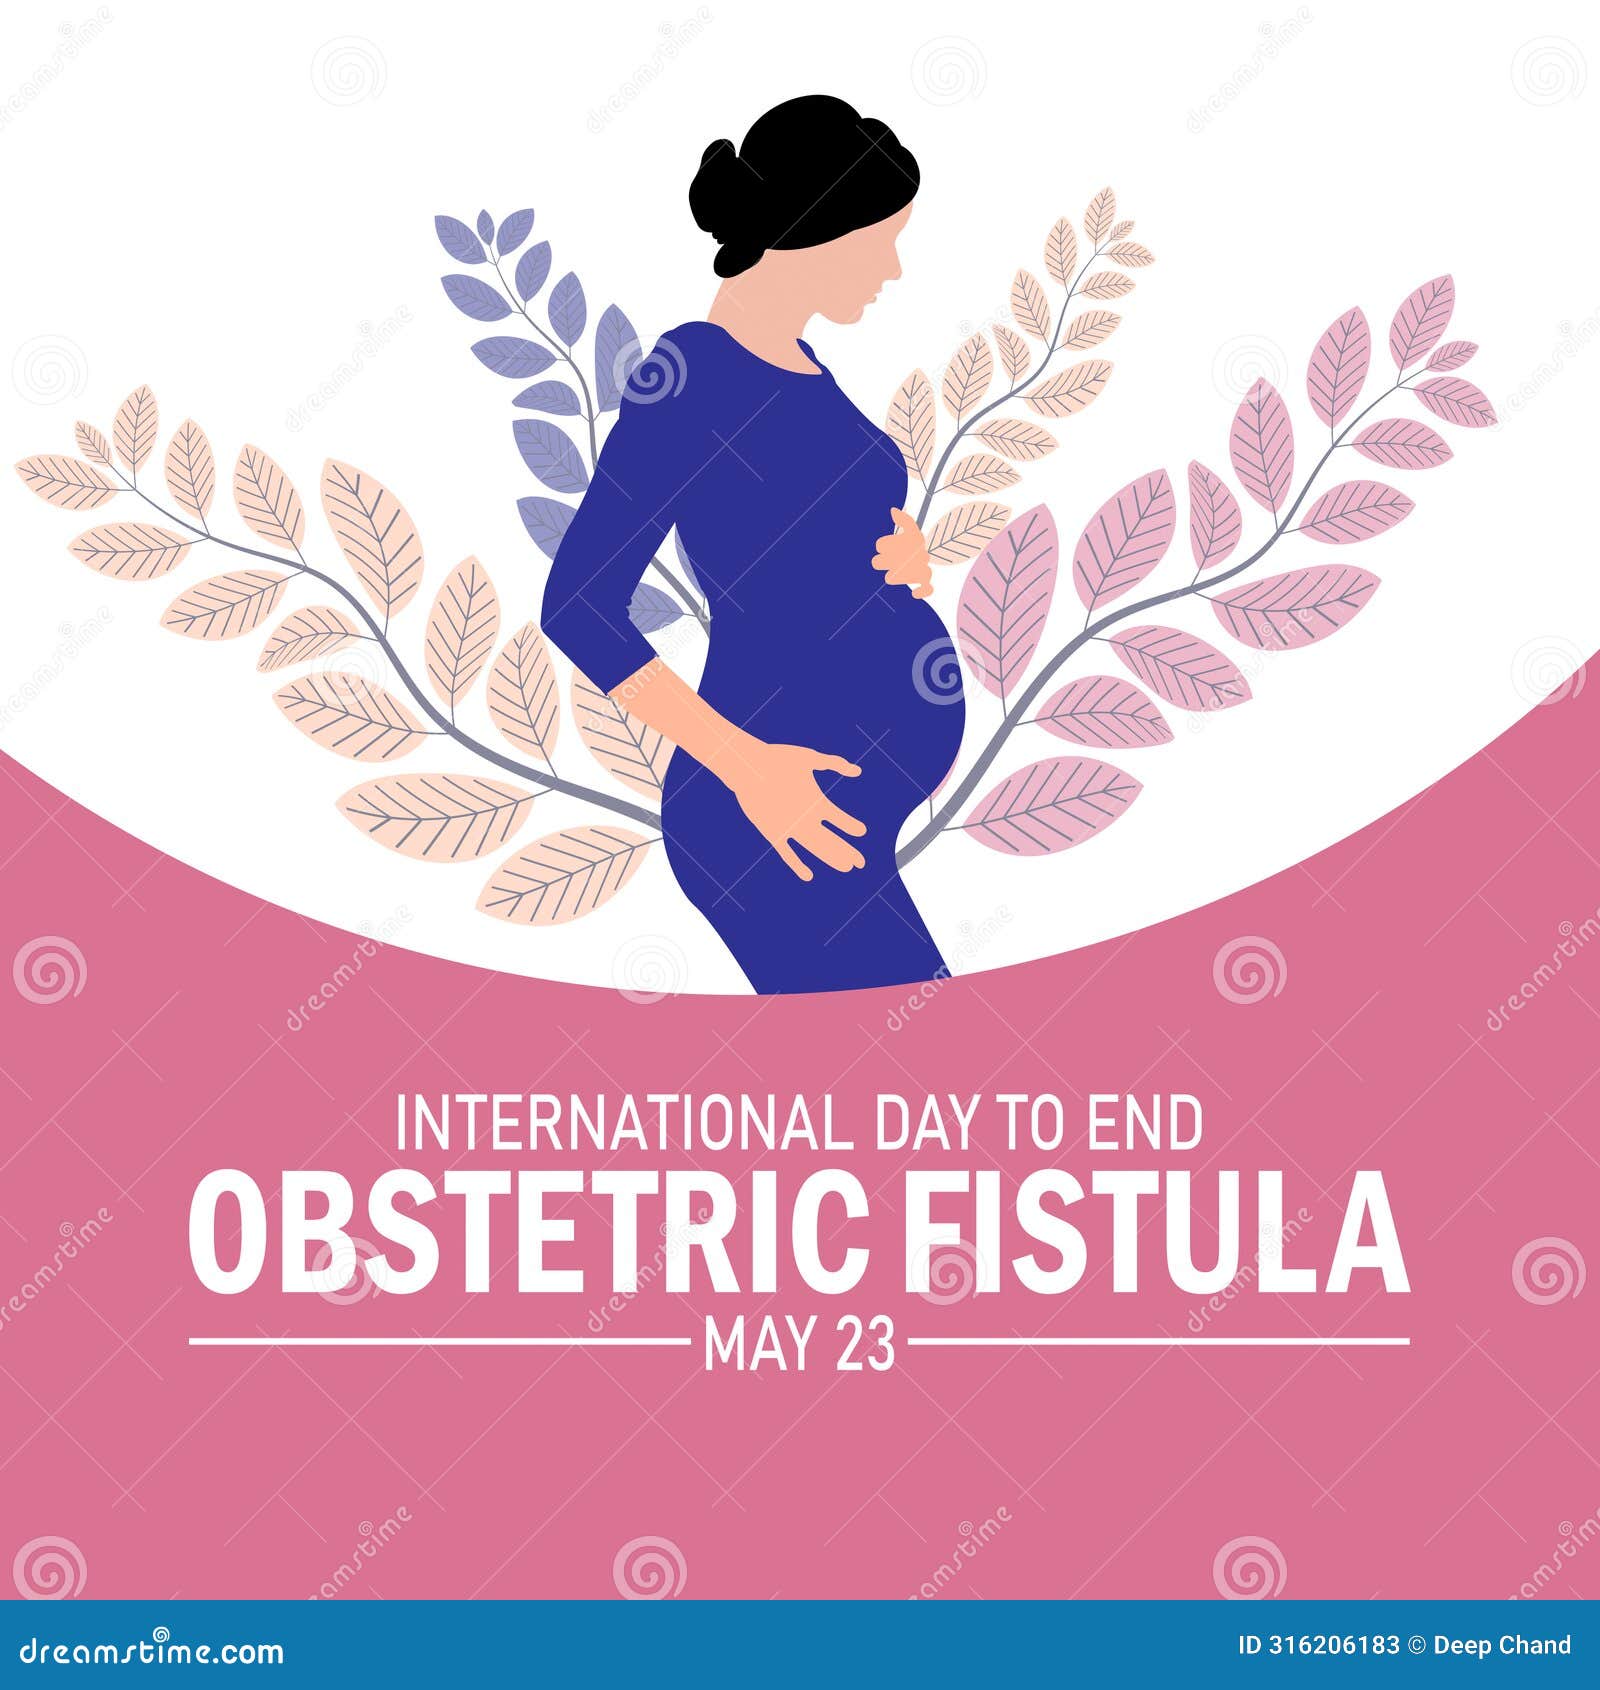 international day to end obstetric fistula, background